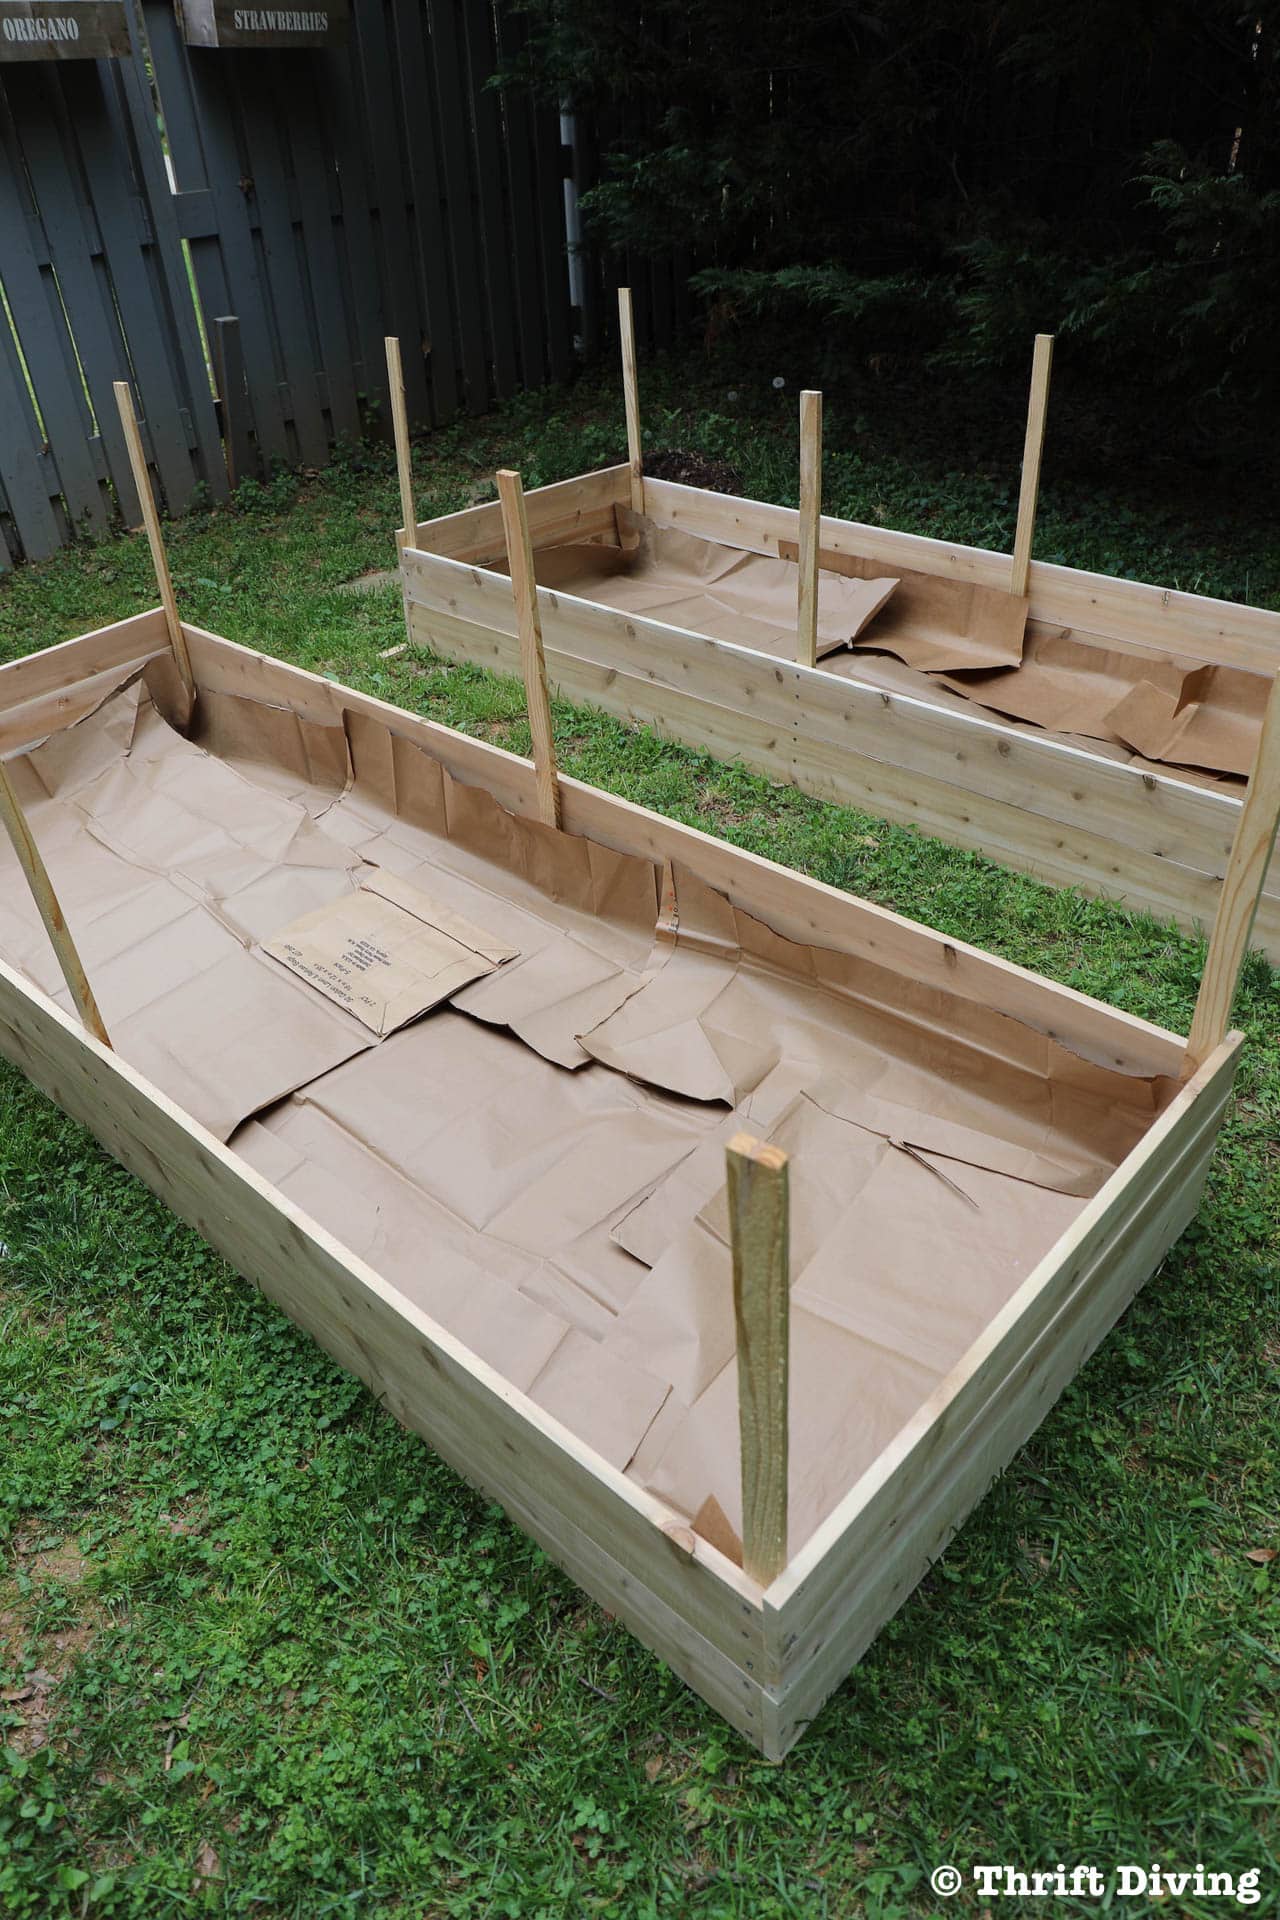 How To Build A Diy Raised Garden Bed And Protect It With Metal Fence - Diy Wooden Raised Garden Beds